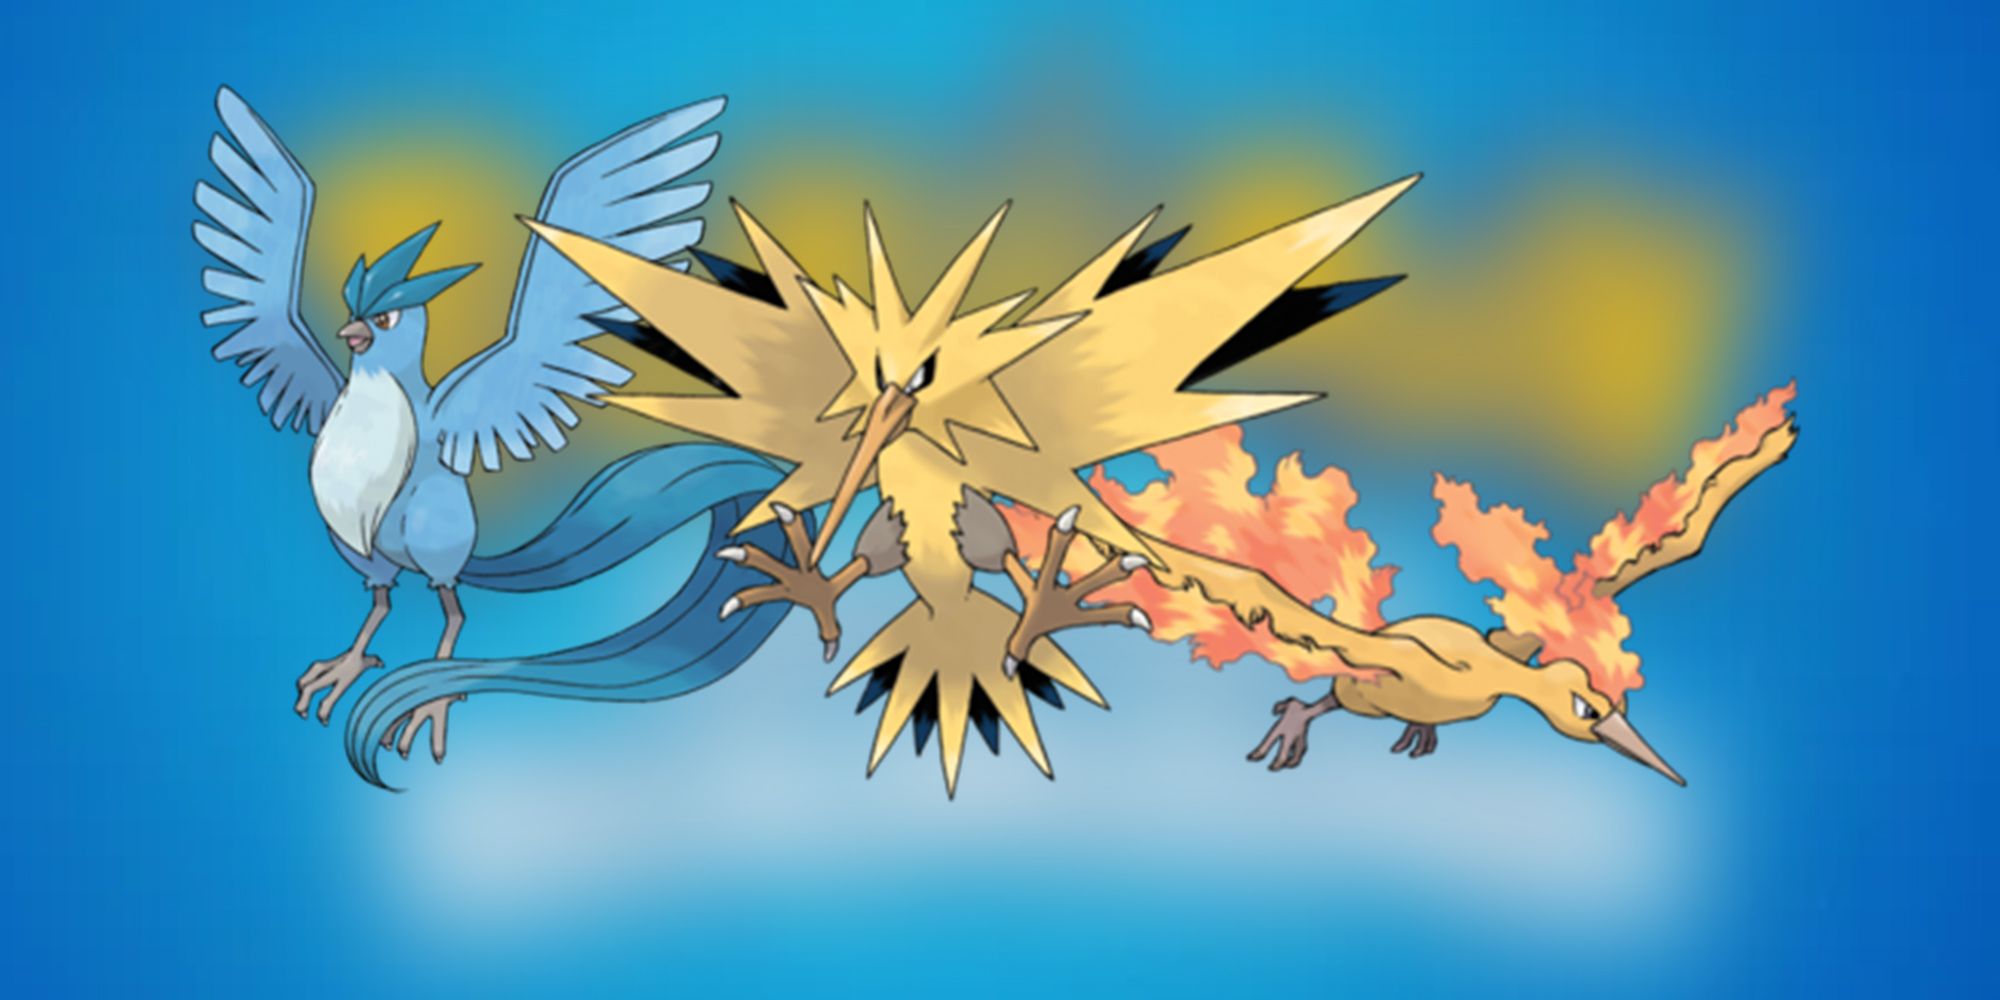 Pokémon BDSP: How To Find (& Catch) Zapdos, Articuno, and Moltres